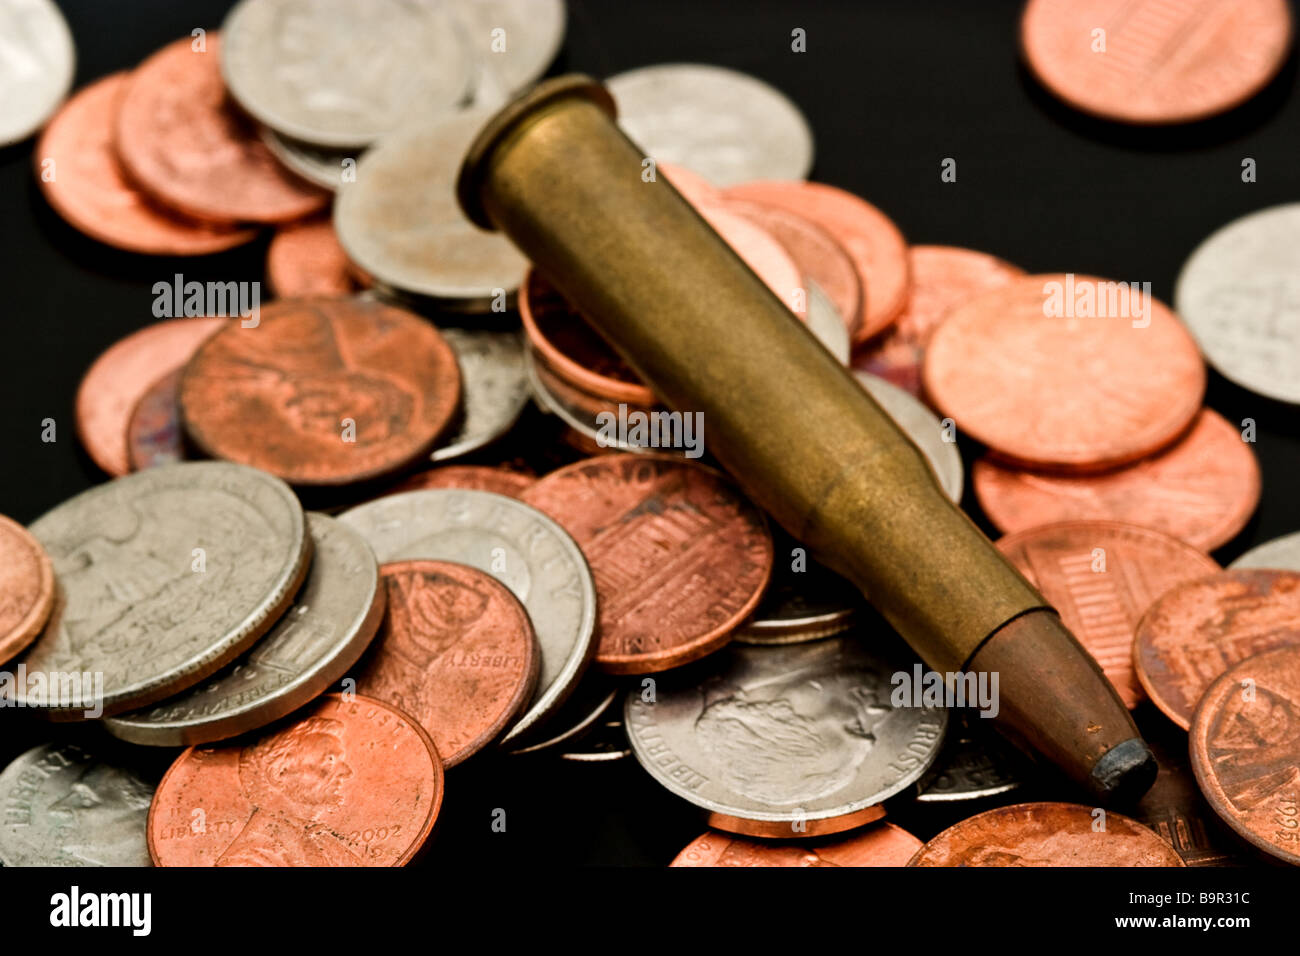 Large caliber bullet in a pile of American coins Stock Photo